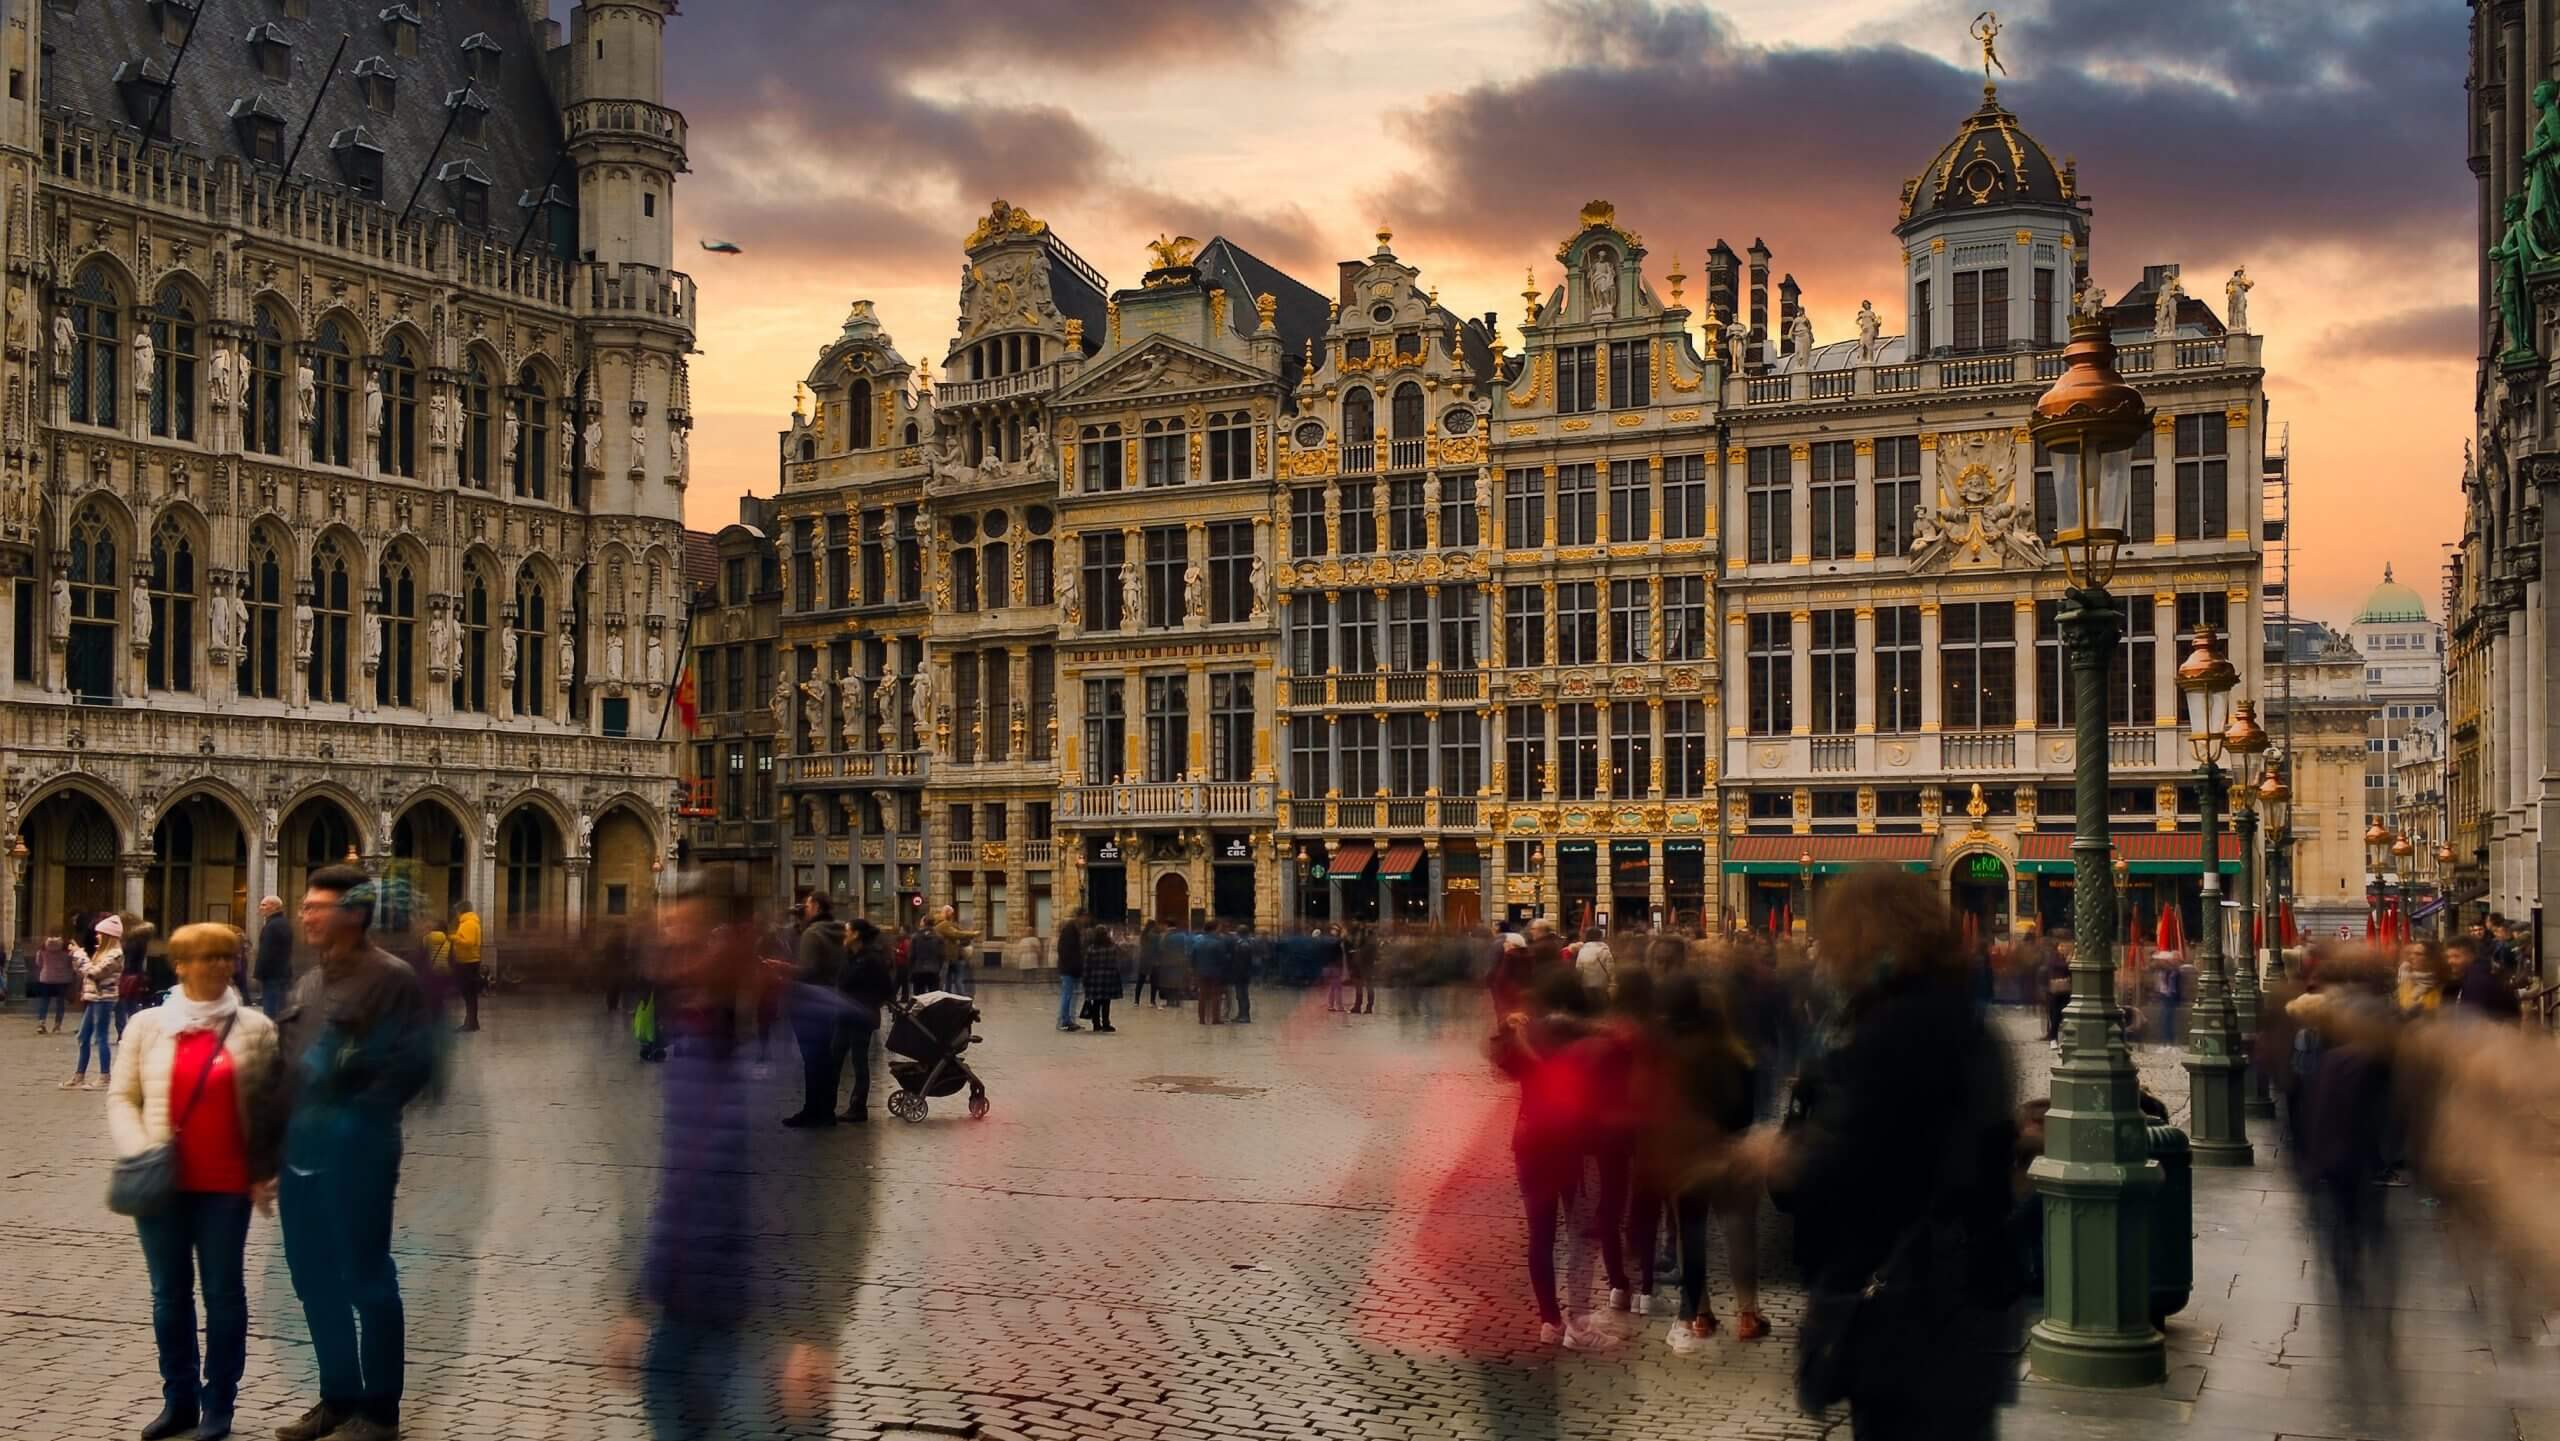 European Square with people - timelapse - Should you carry your passport with you in Europe?
